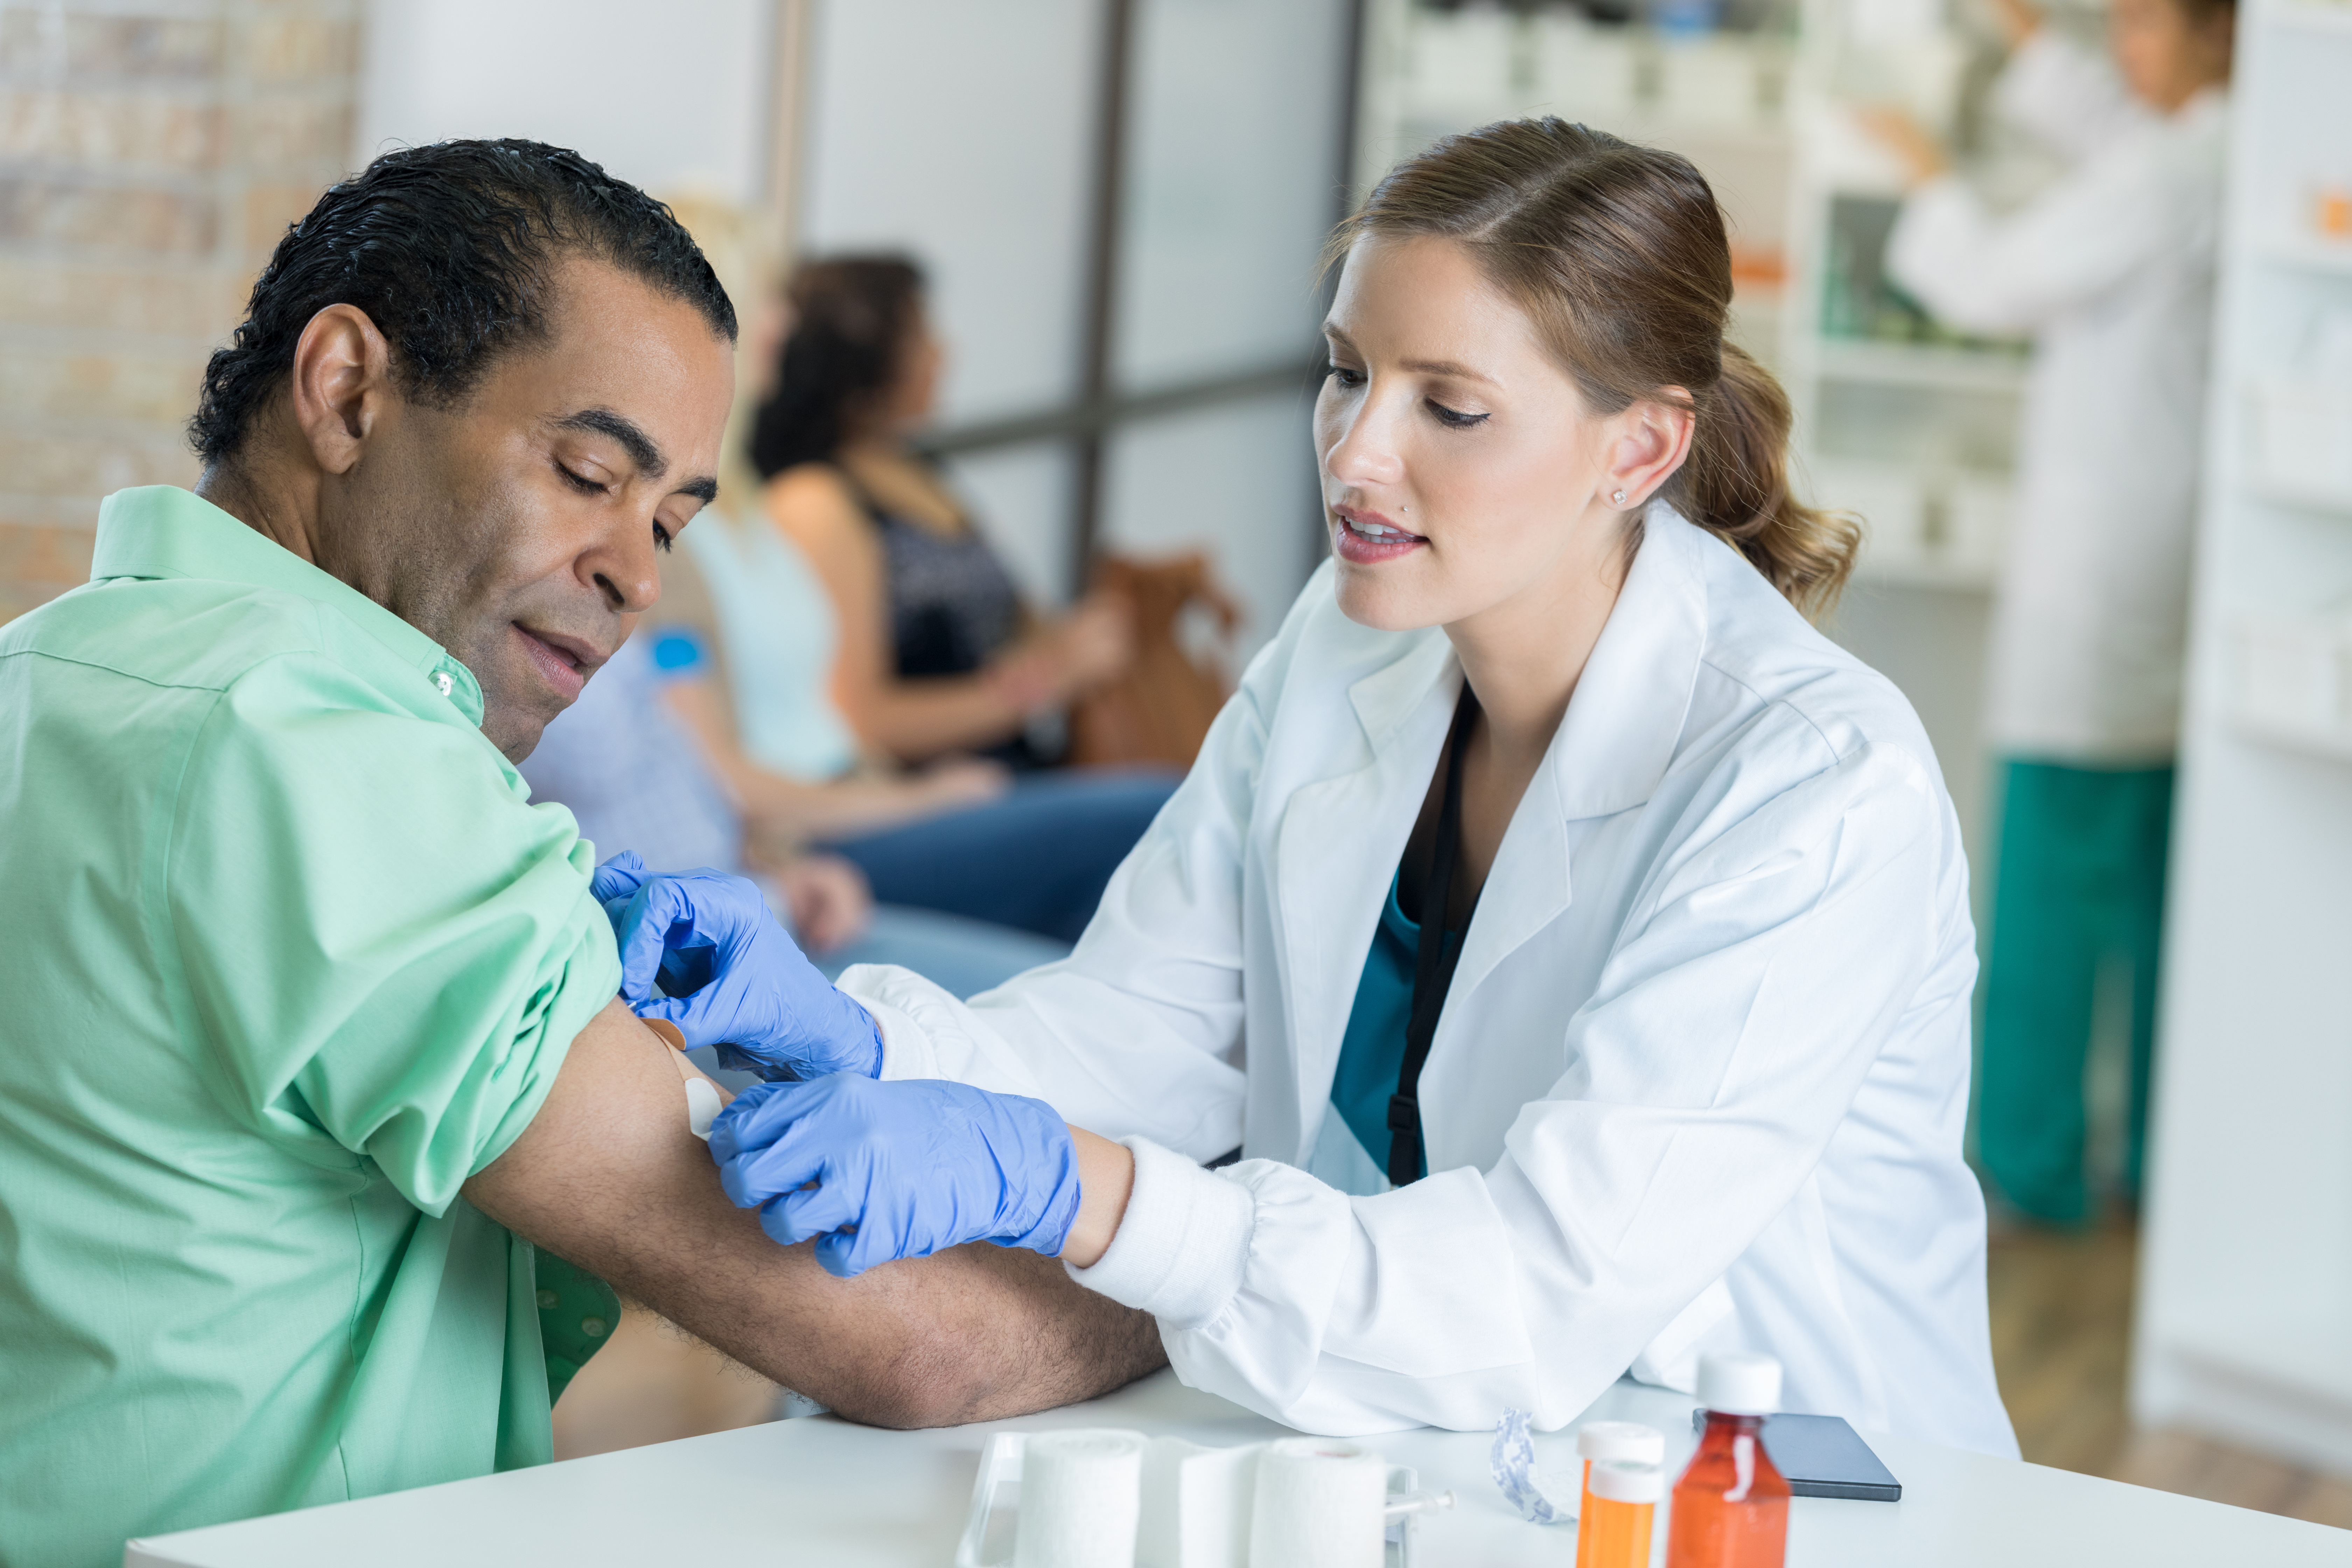 Caring healthcare professional places bandage on man's arm